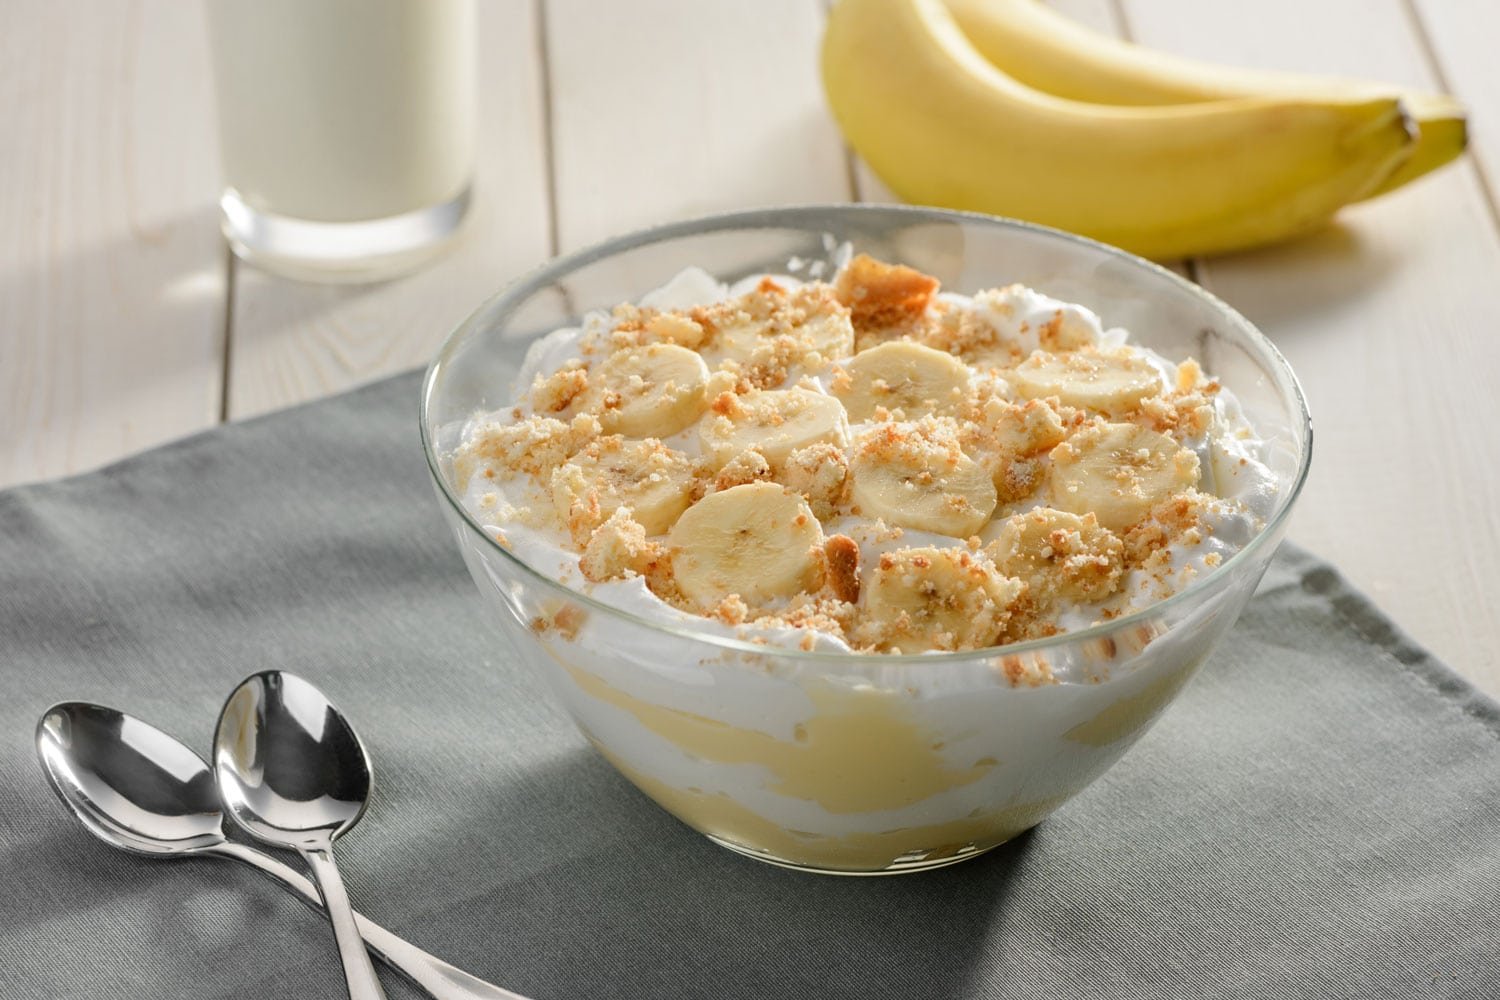 Banana pudding and its delicious topping of a cookie bread